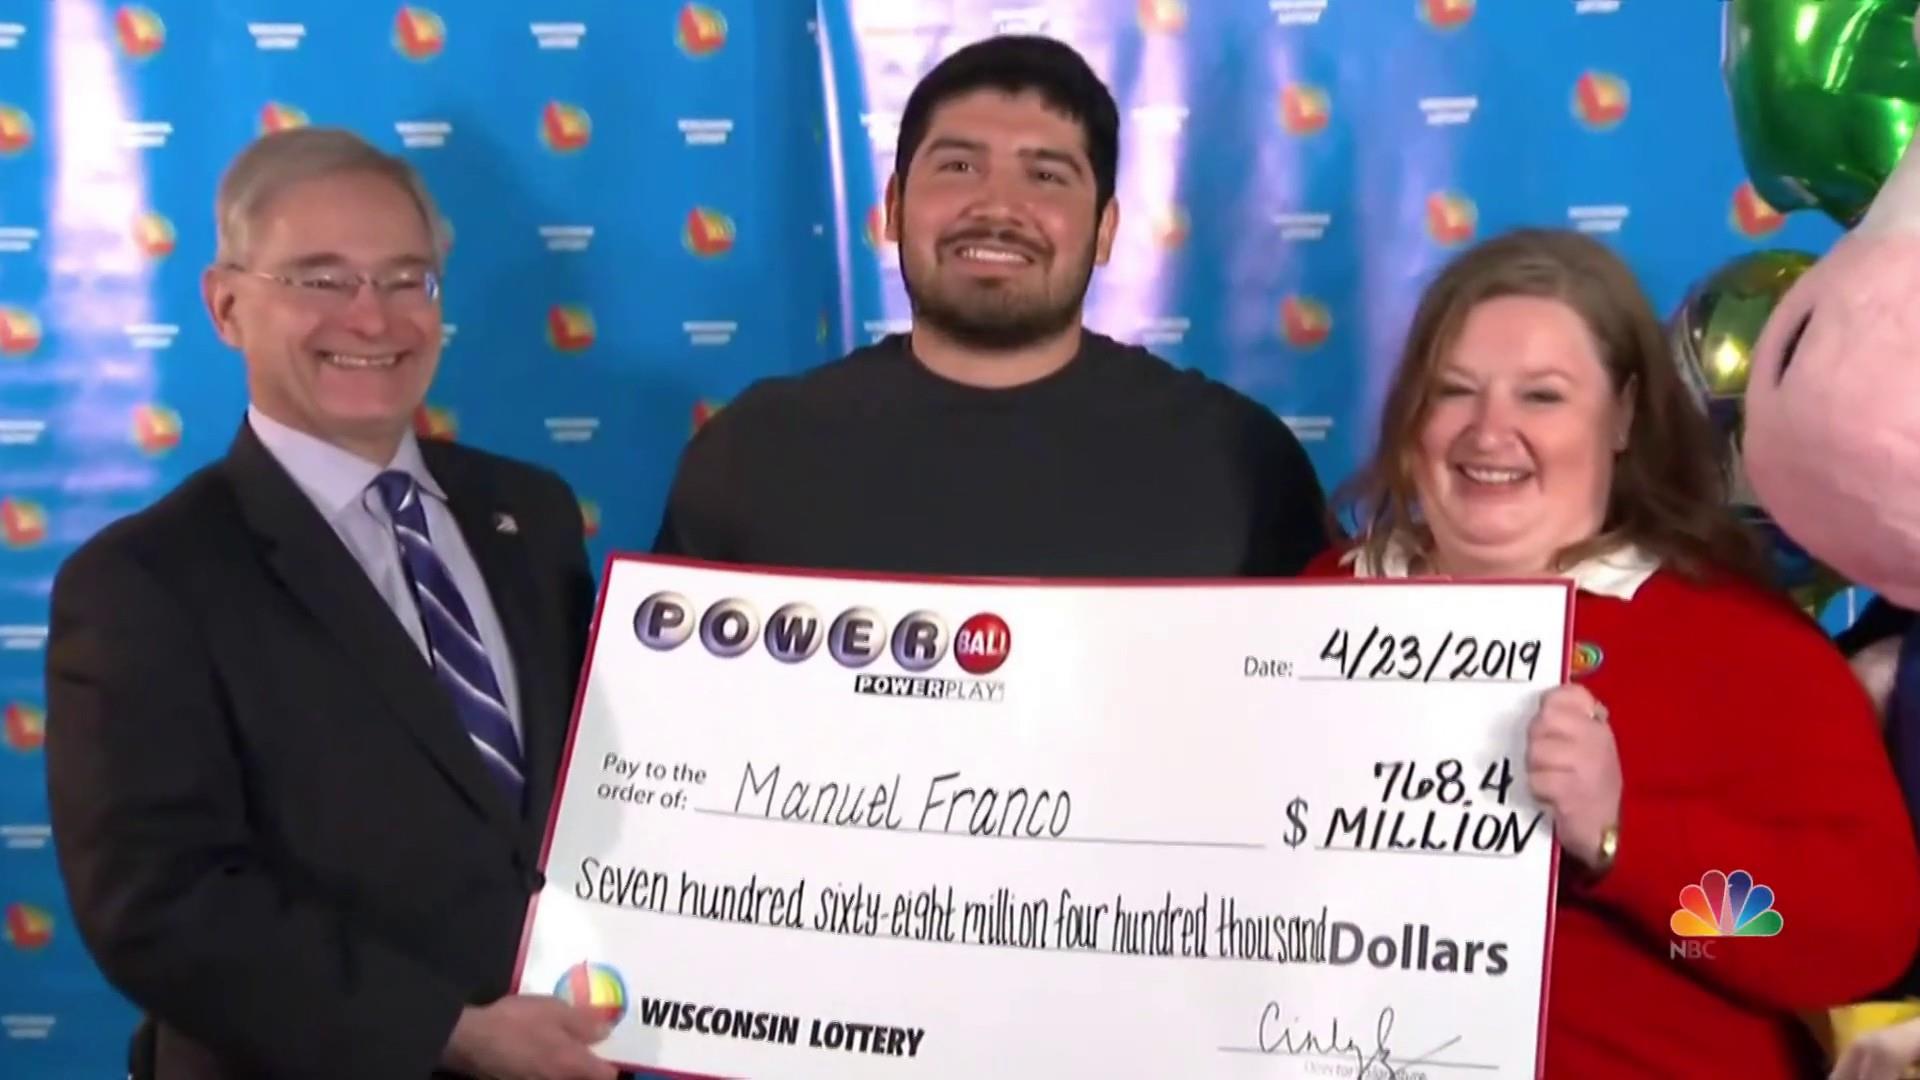 Powerball Winners: Stories of Life-Altering Fortunes